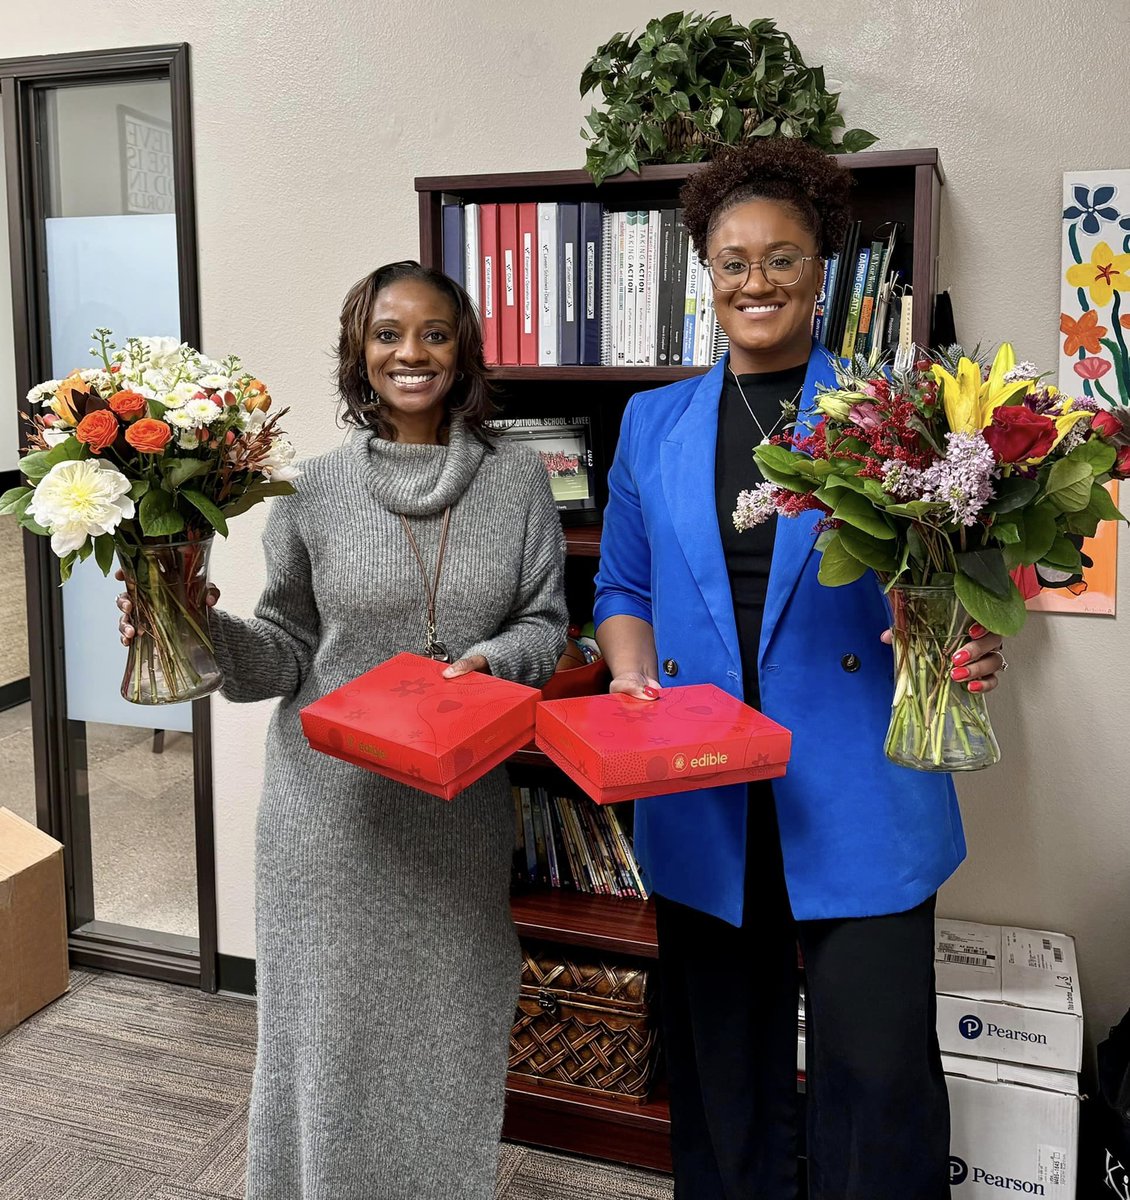 🌻 Happy #NationalAssistantPrincipalsWeek to all of our amazing and hard-working APs 🌻 We truly appreciate everything you do to support our campuses and help our learners thrive. Check out a few of the surprises campuses had in store for our Assistant Principals this week!